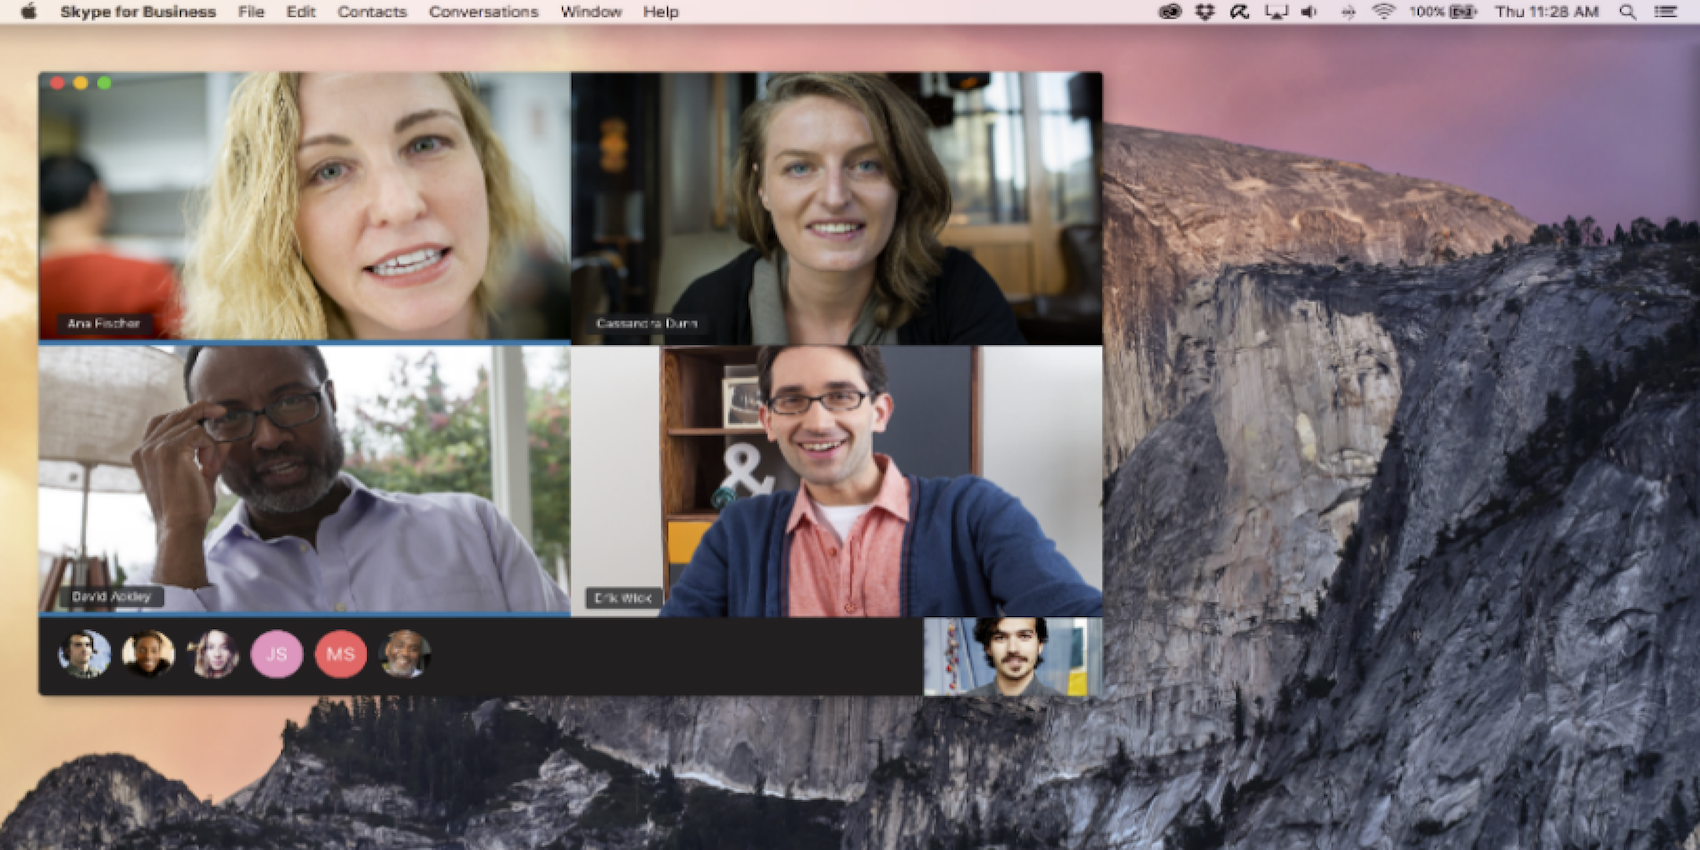 search for contacts skype for business mac